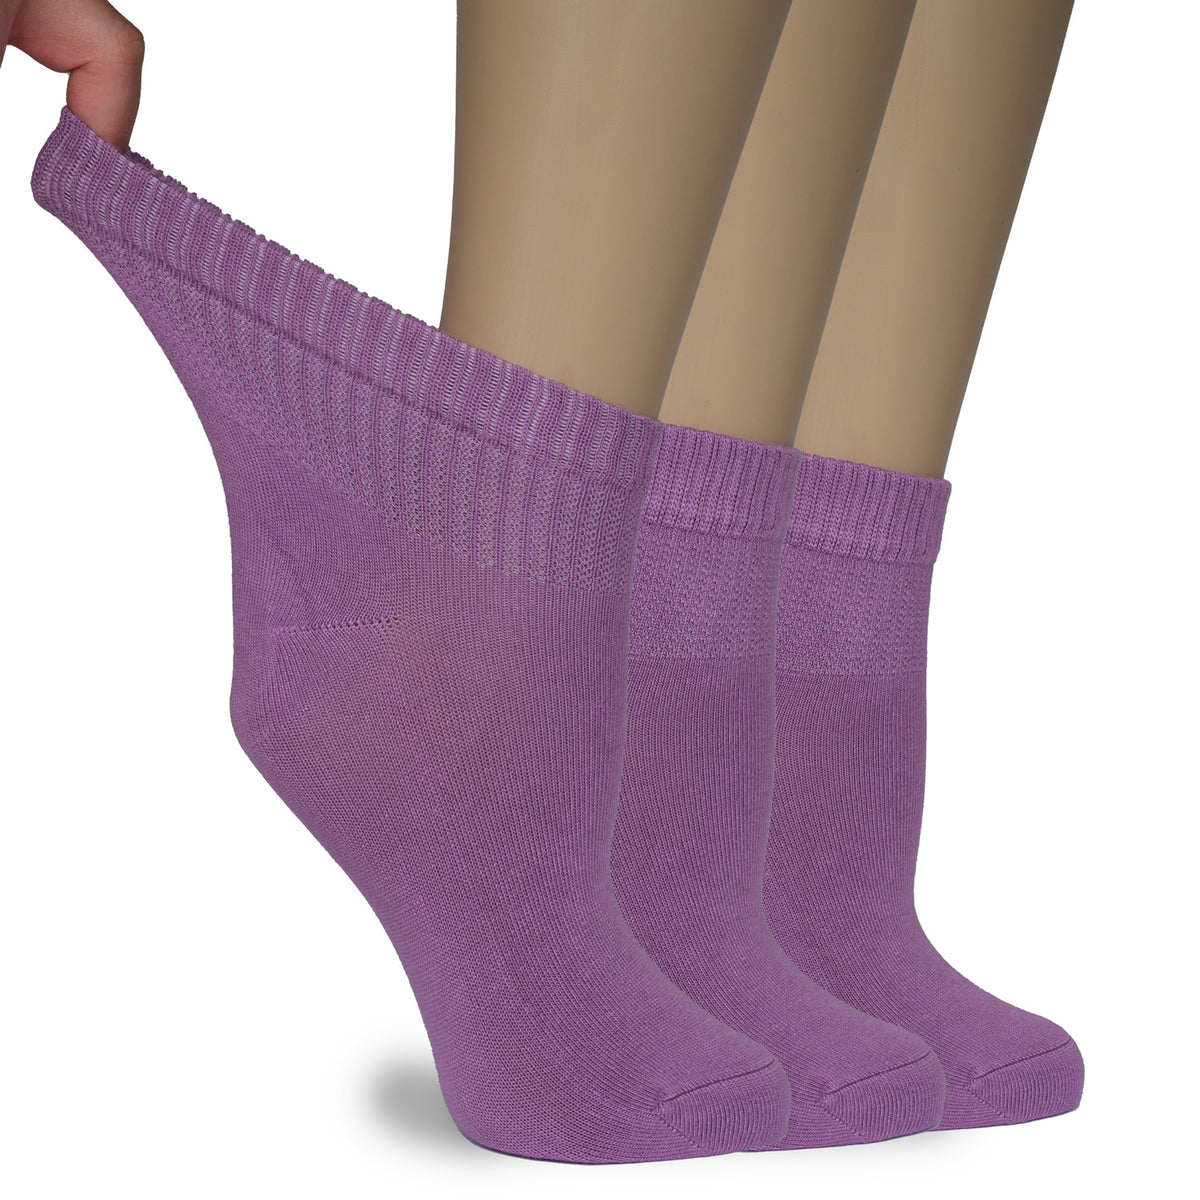 Women's Comfortable Diabetic Bamboo Ankle Socks for Swollen Legs, 3 Pairs